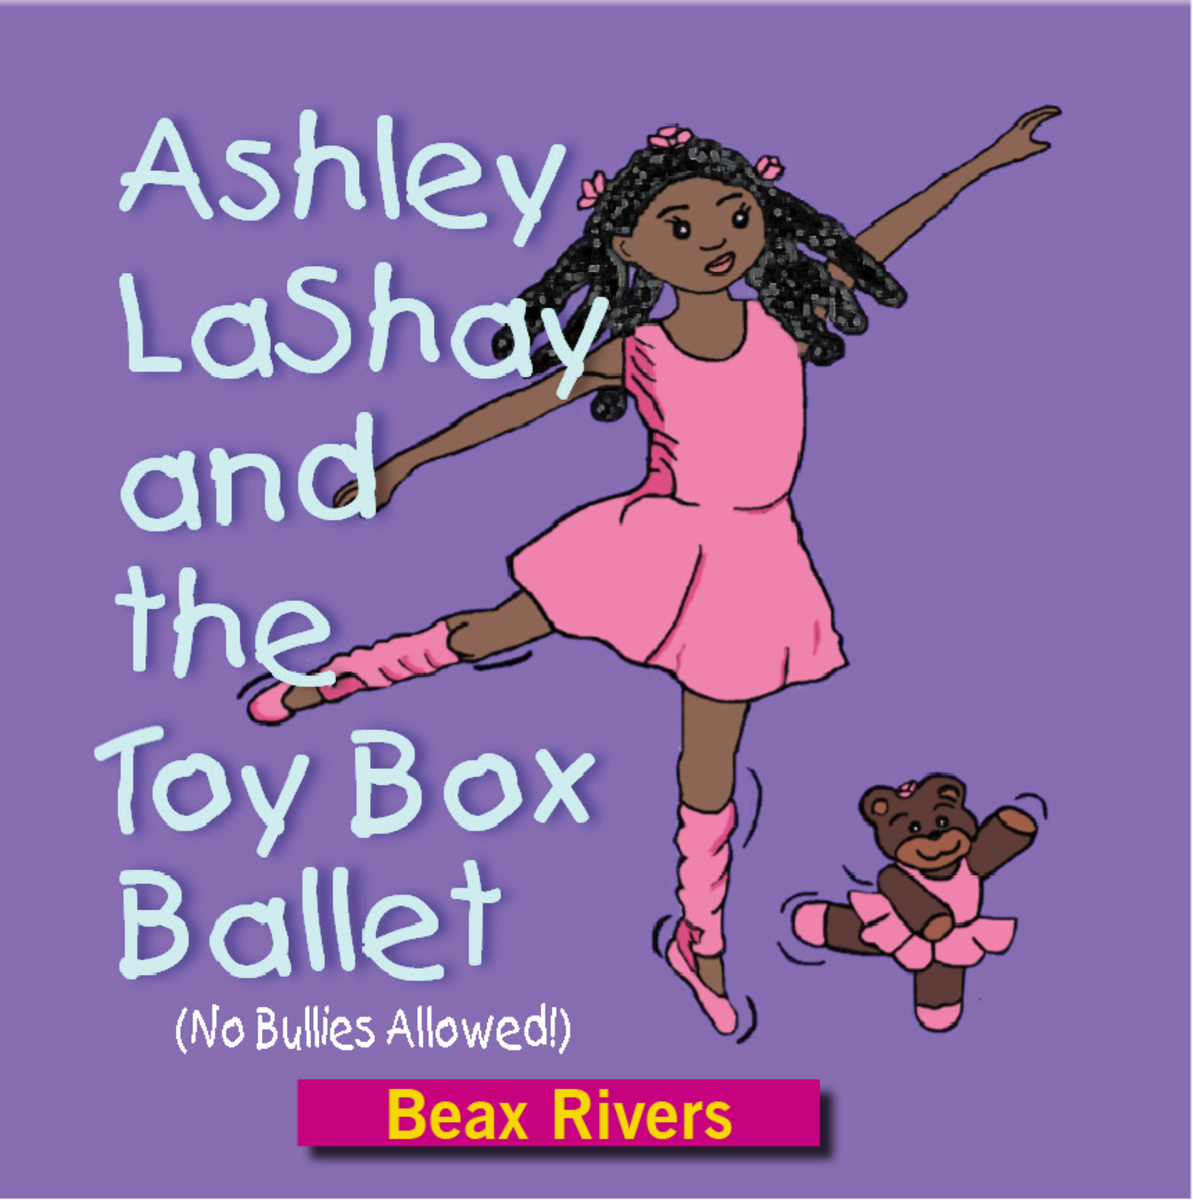 This is a children's book I published that takes a whimsical look at bullying (my pen name is Beax Rivers). It is available for purchase on Amazon.com (published using Amazon's CreateSpace self-publishing platform).